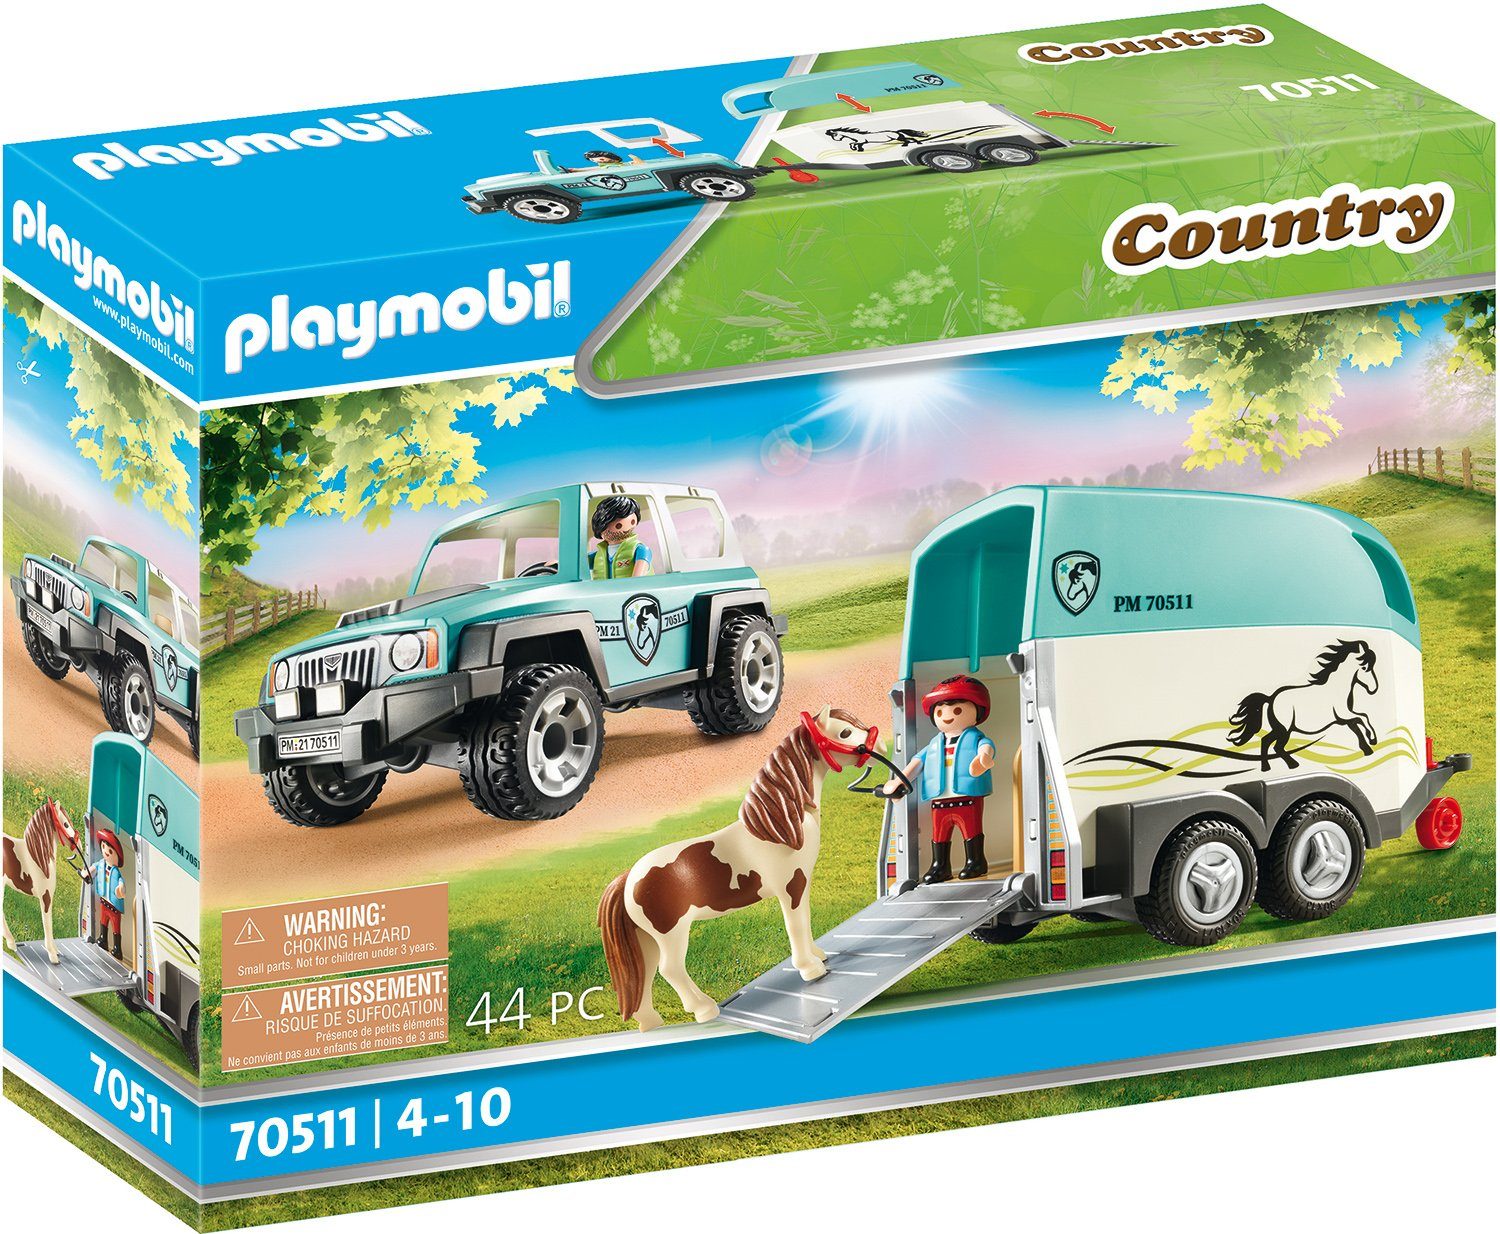 in Made mit Ponyanhänger Playmobil® Konstruktions-Spielset PKW (70511), (44 Country, St), Germany